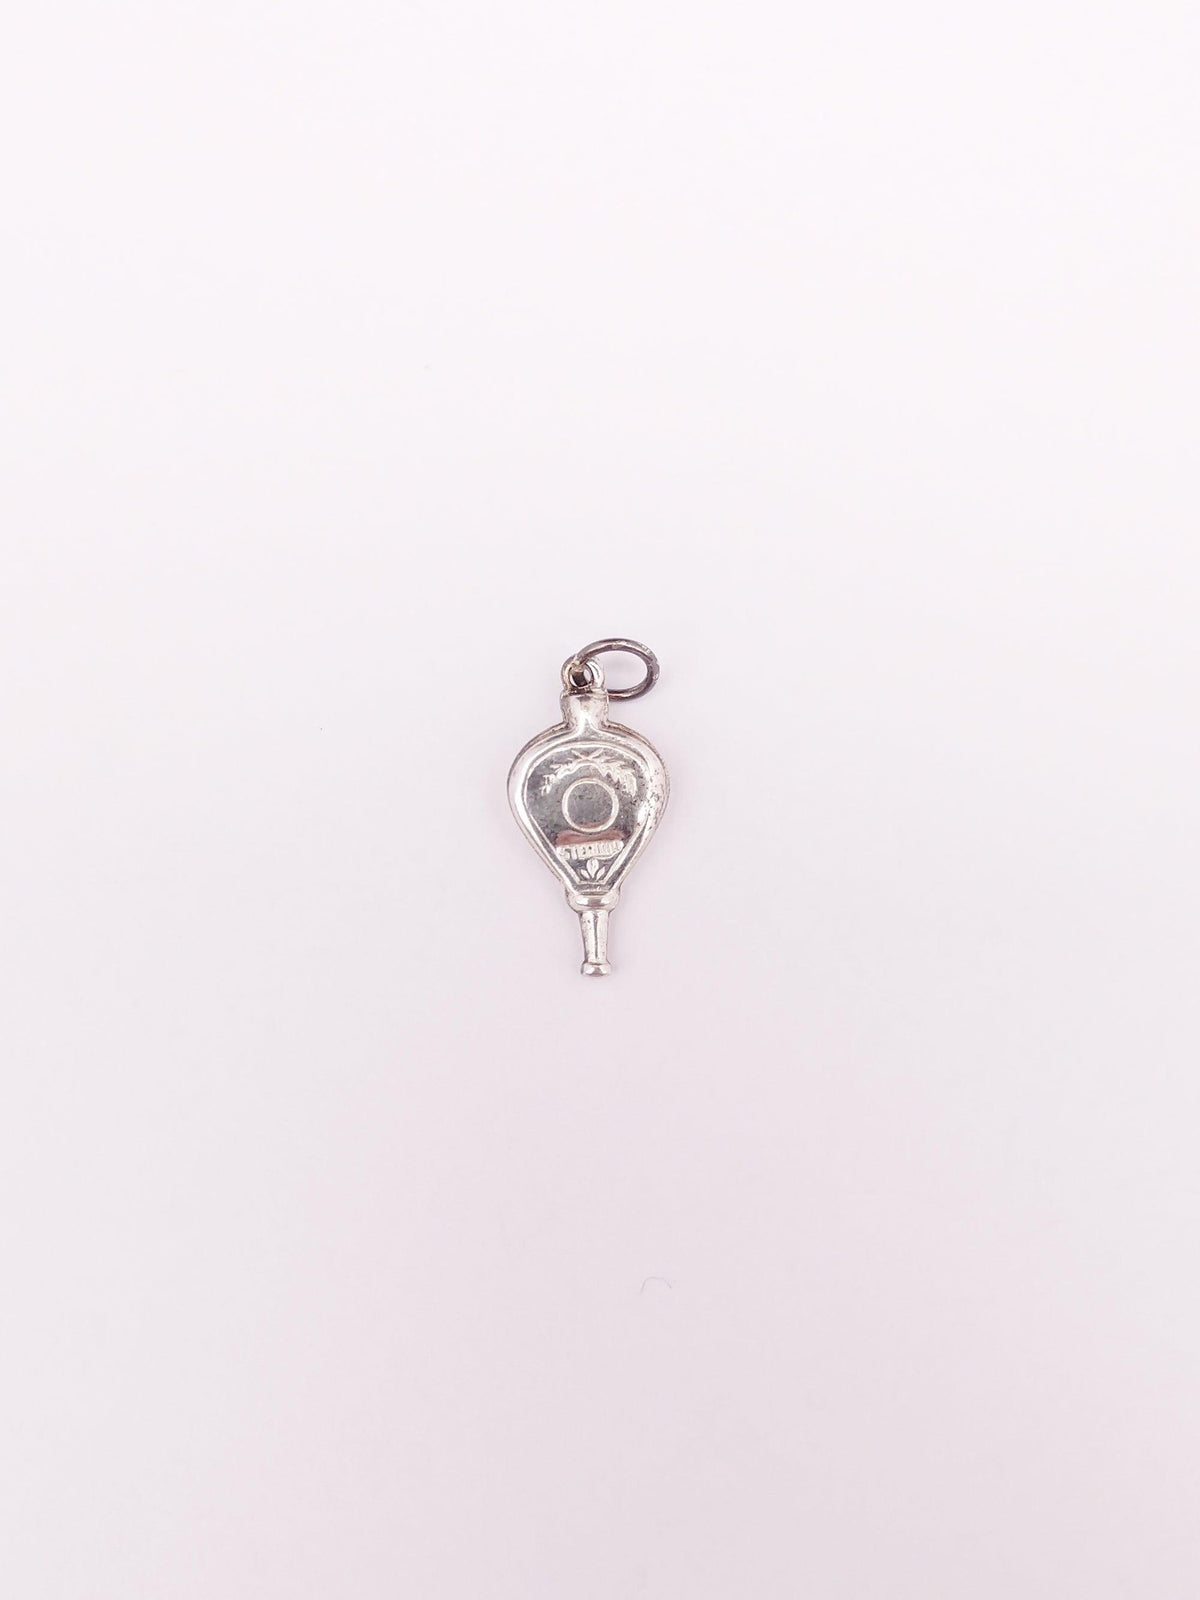 Vintage Fire Bellow Sterling Silver Charm - Hers and His Treasures